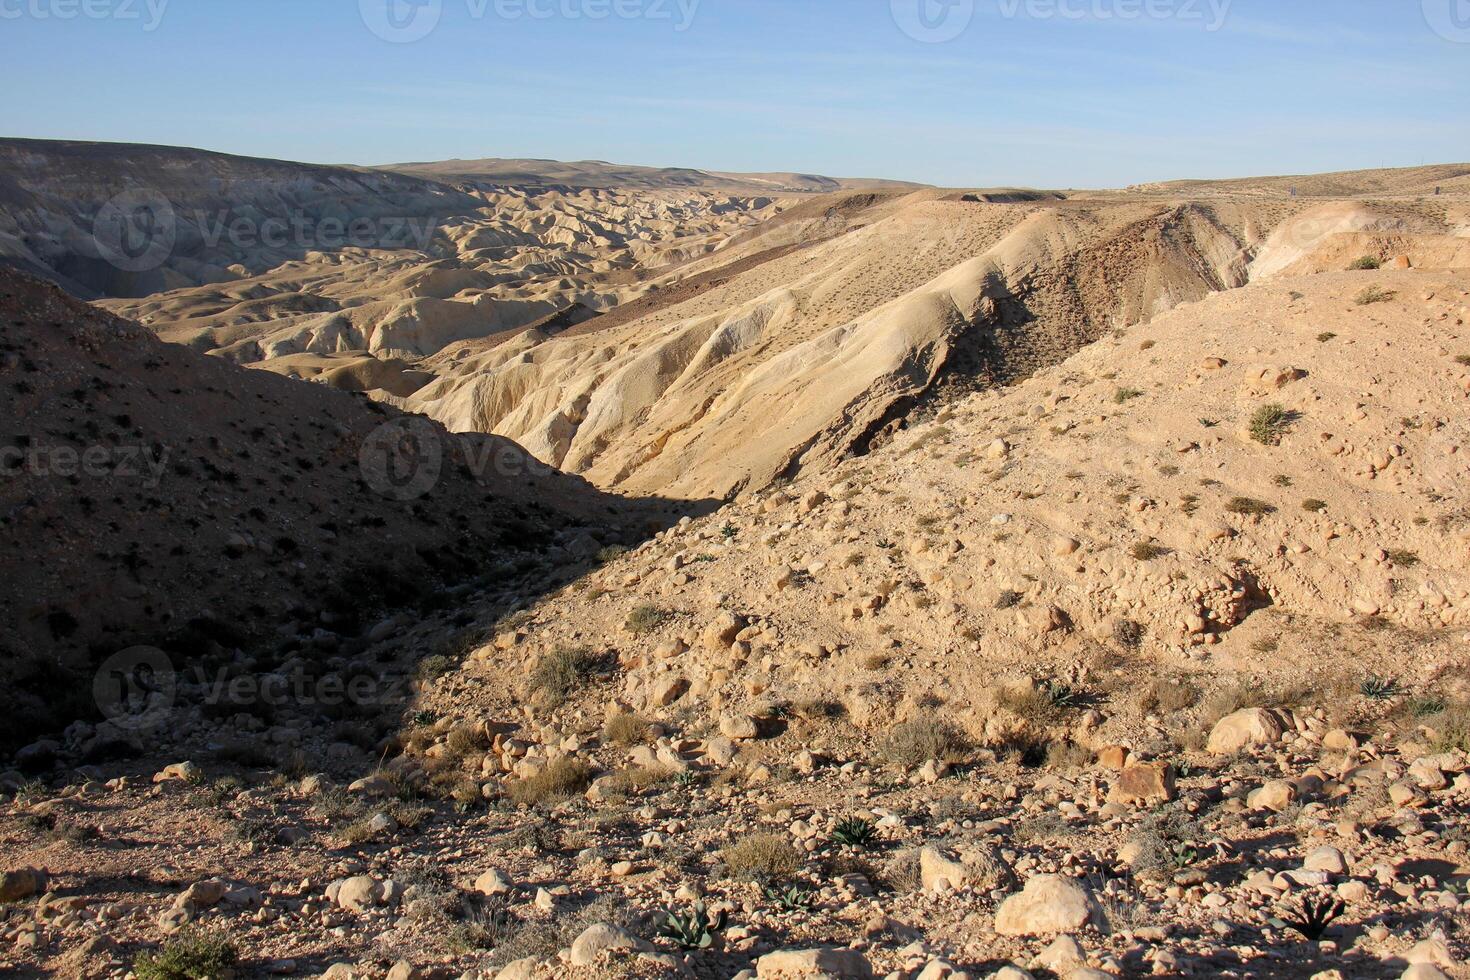 The Negev is a desert in the Middle East, located in Israel and occupying about 60 of its territory. photo